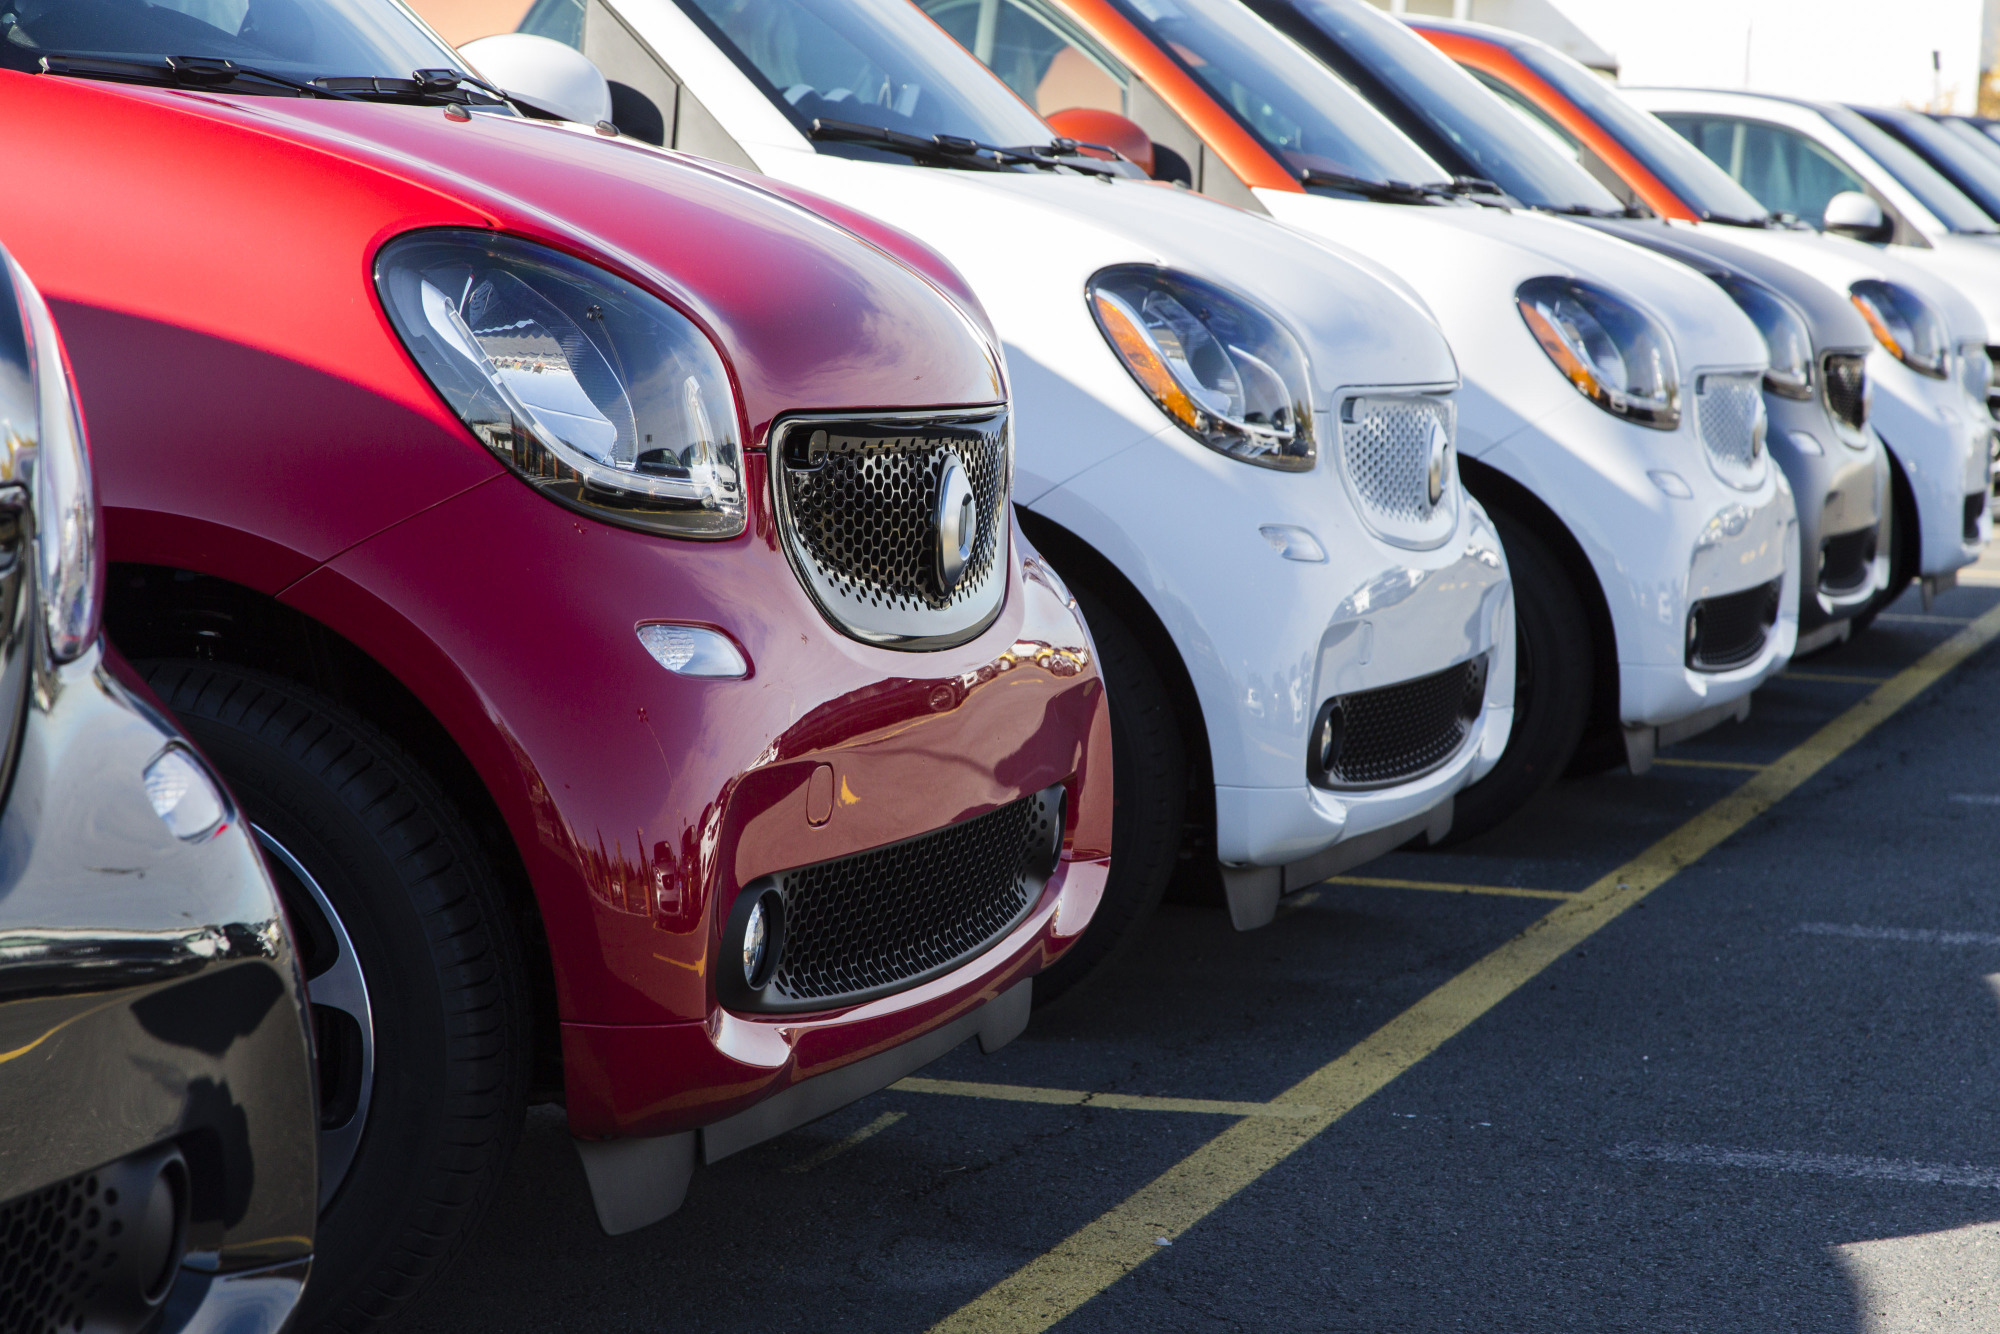 Smart dealers face decision amid shift to EVs